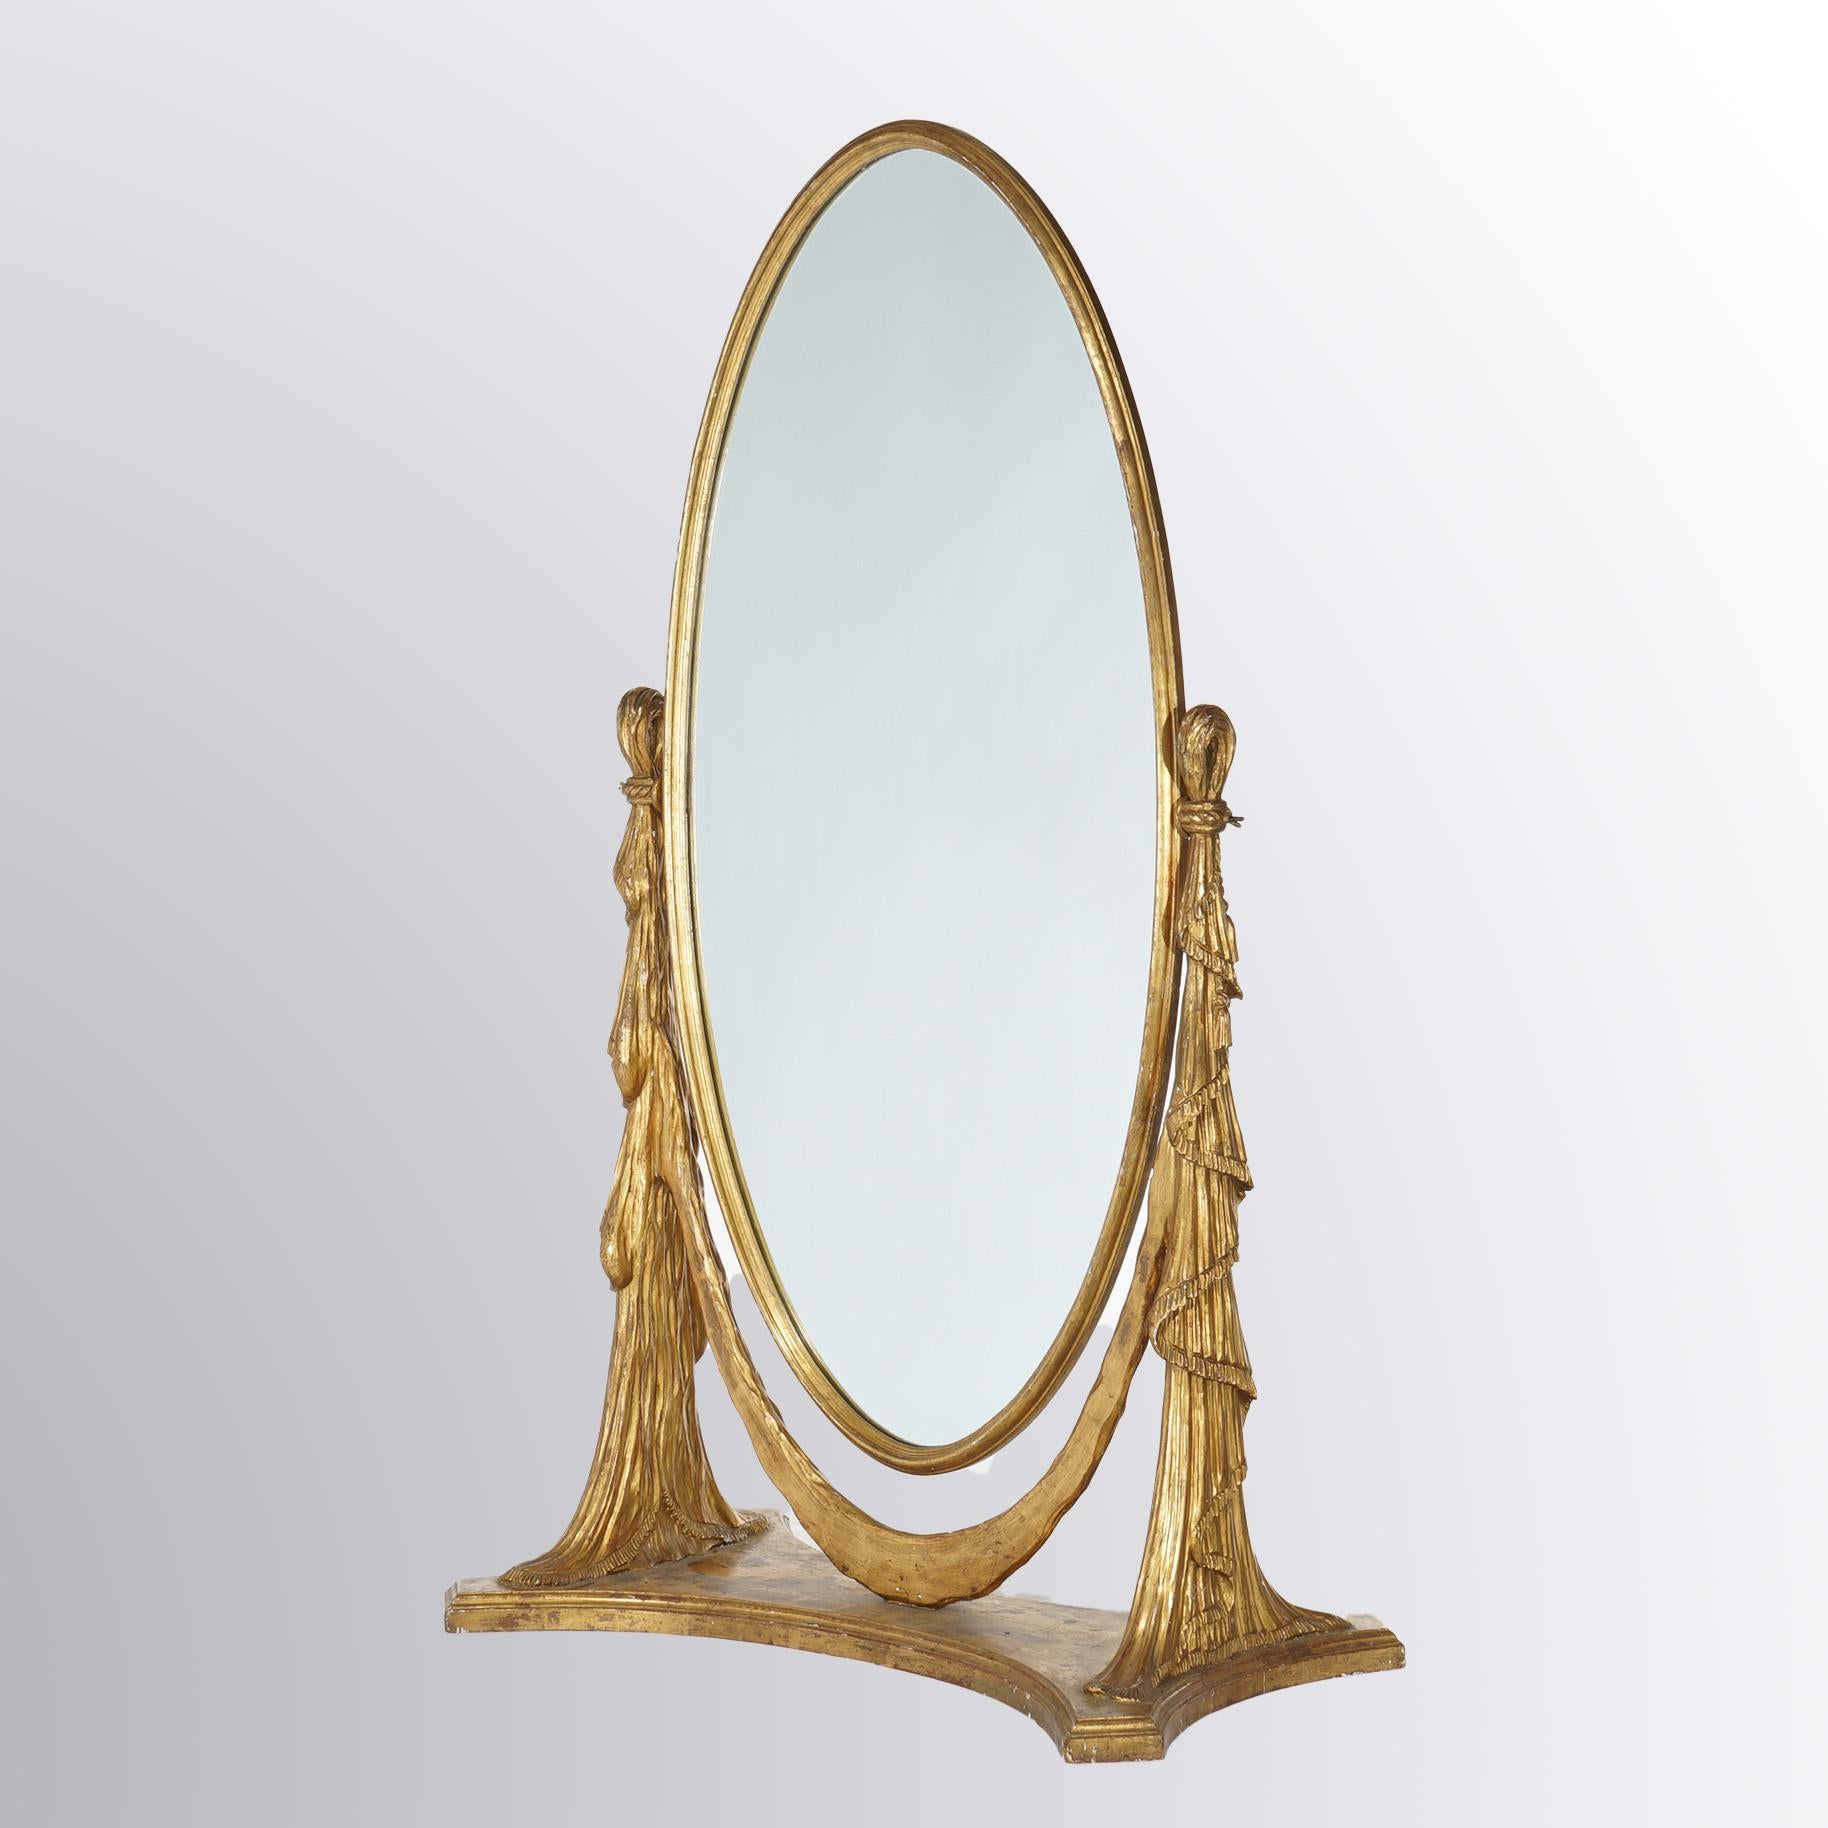 An antique Art Nouveau Chevelle pier mirror offers carved giltwood frame with oval swivel mirror seated between two drapery form supports, 20th century

Measures - 69.25